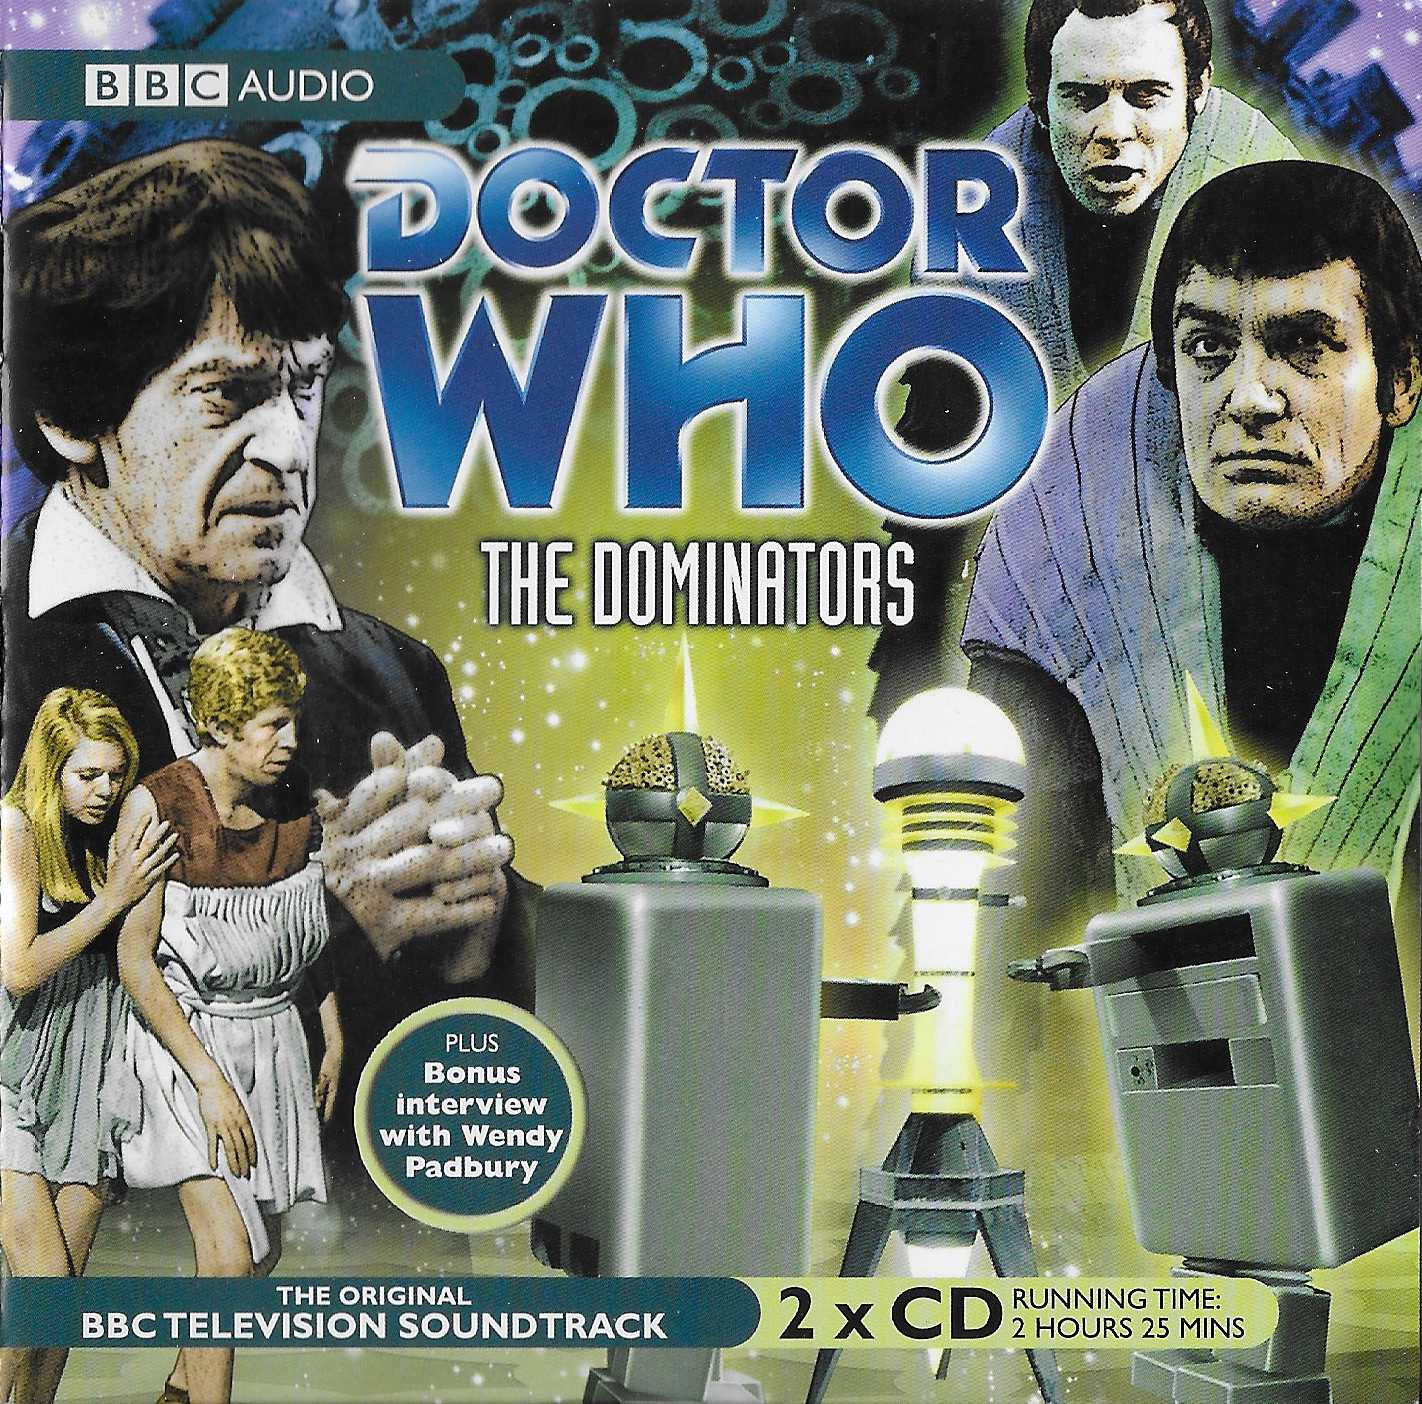 Picture of Doctor Who - The Dominators by artist Norman Ashby (Mervyn Haisman / Henry Lincoln) from the BBC cds - Records and Tapes library